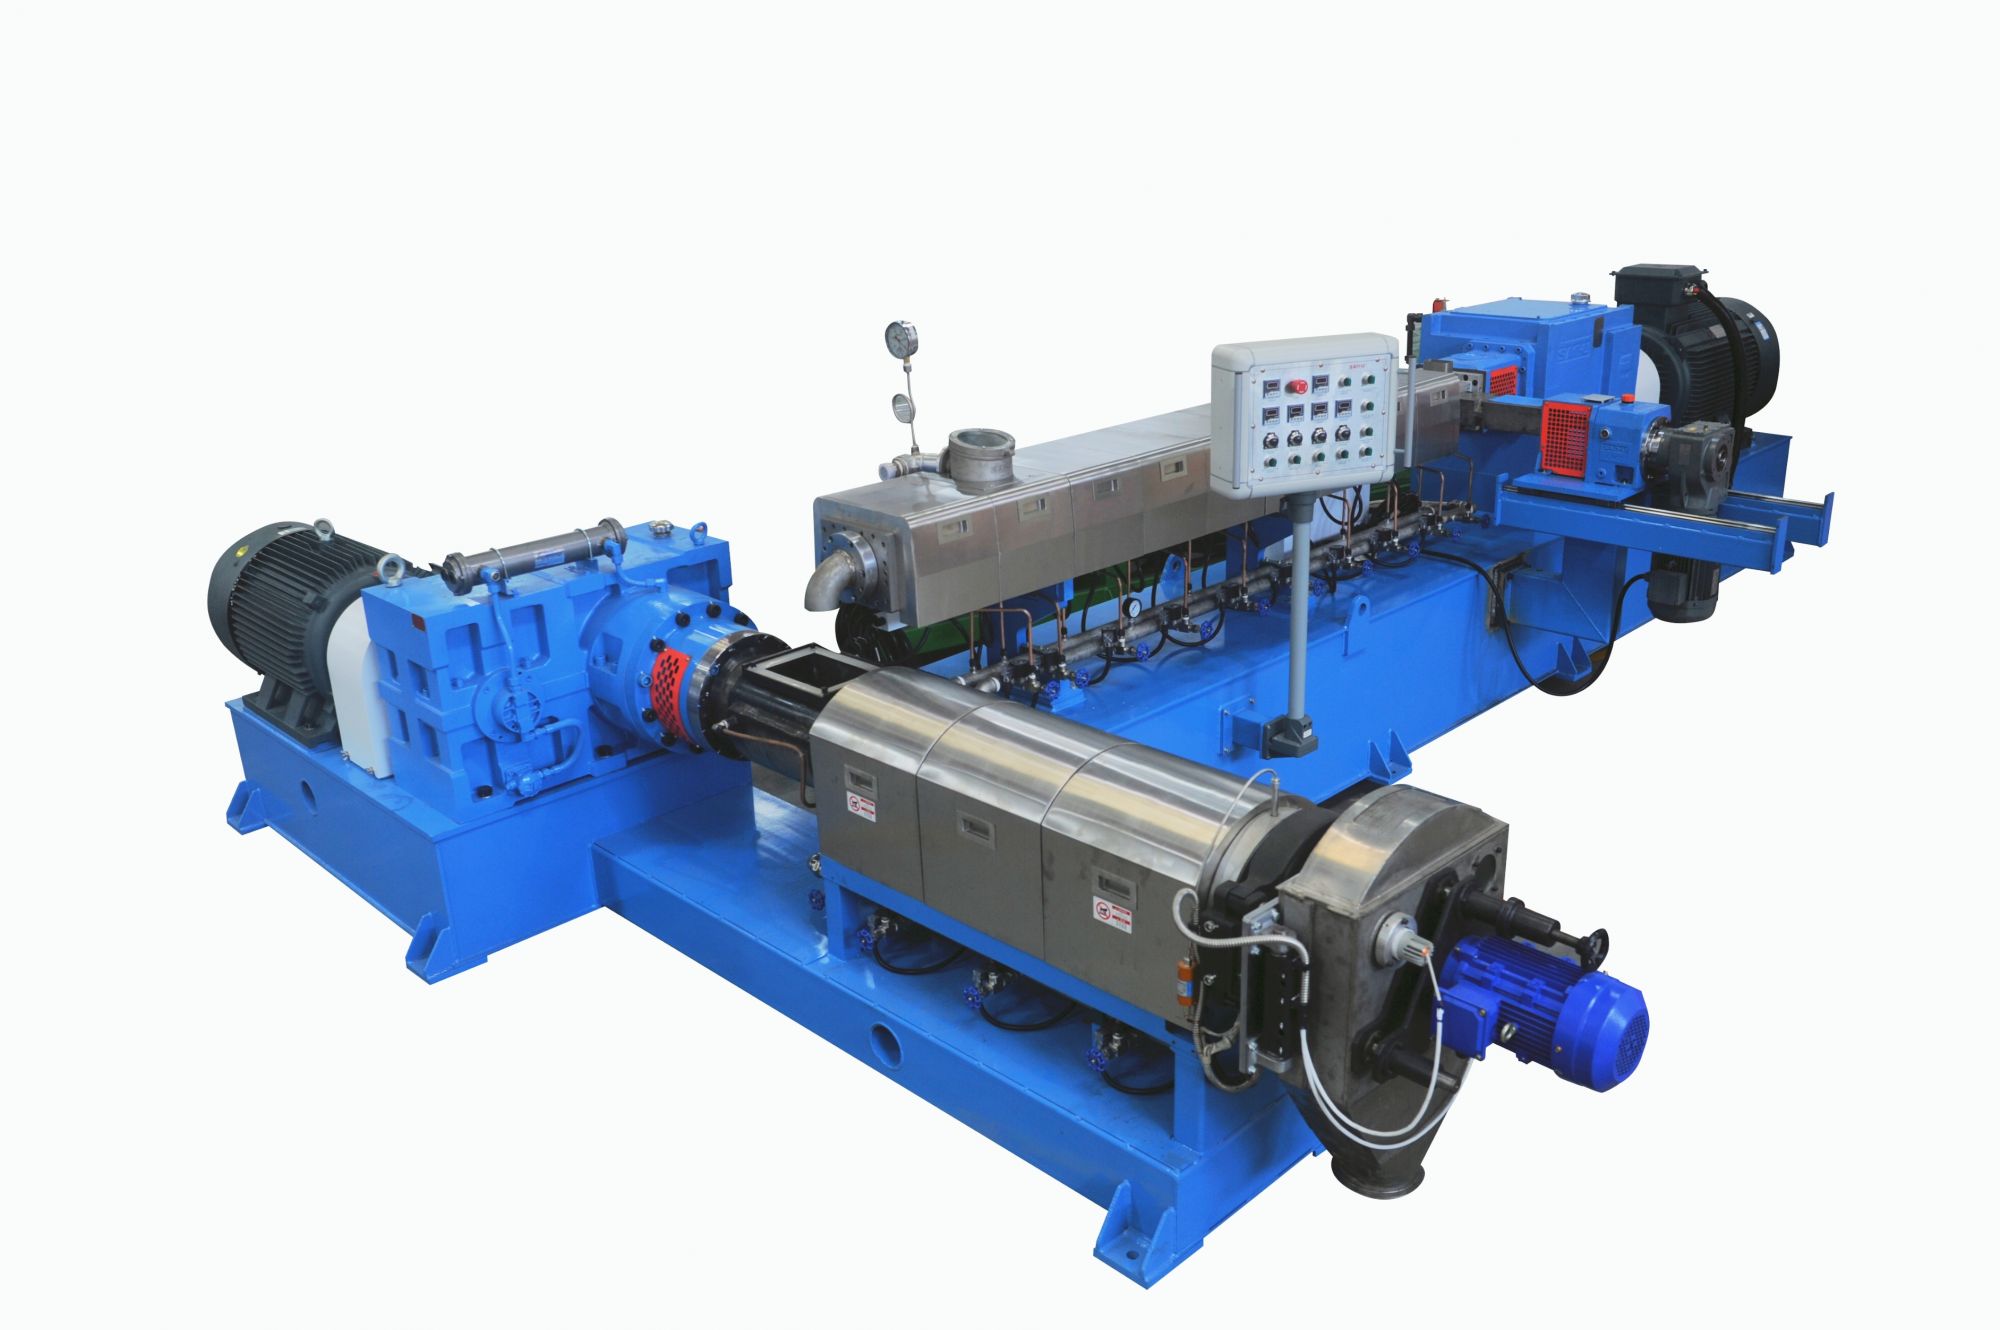 PARALLEL CO-ROTATING TWIN SCREW DOUBLE STAGE EXTRUDER